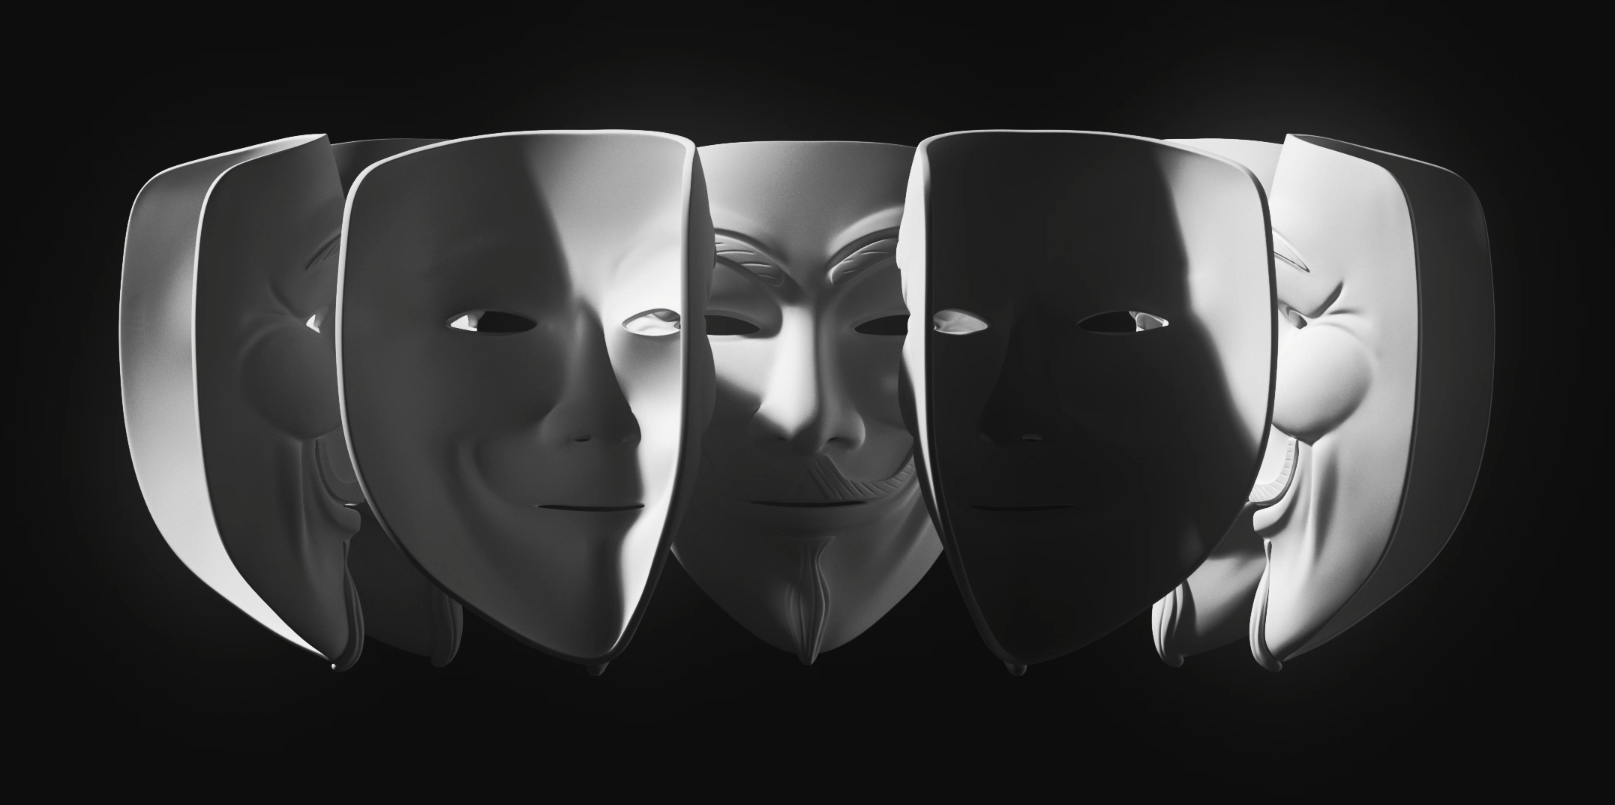 A still from a digital animation in which five Guy Fawkes masks spin through light and shadow